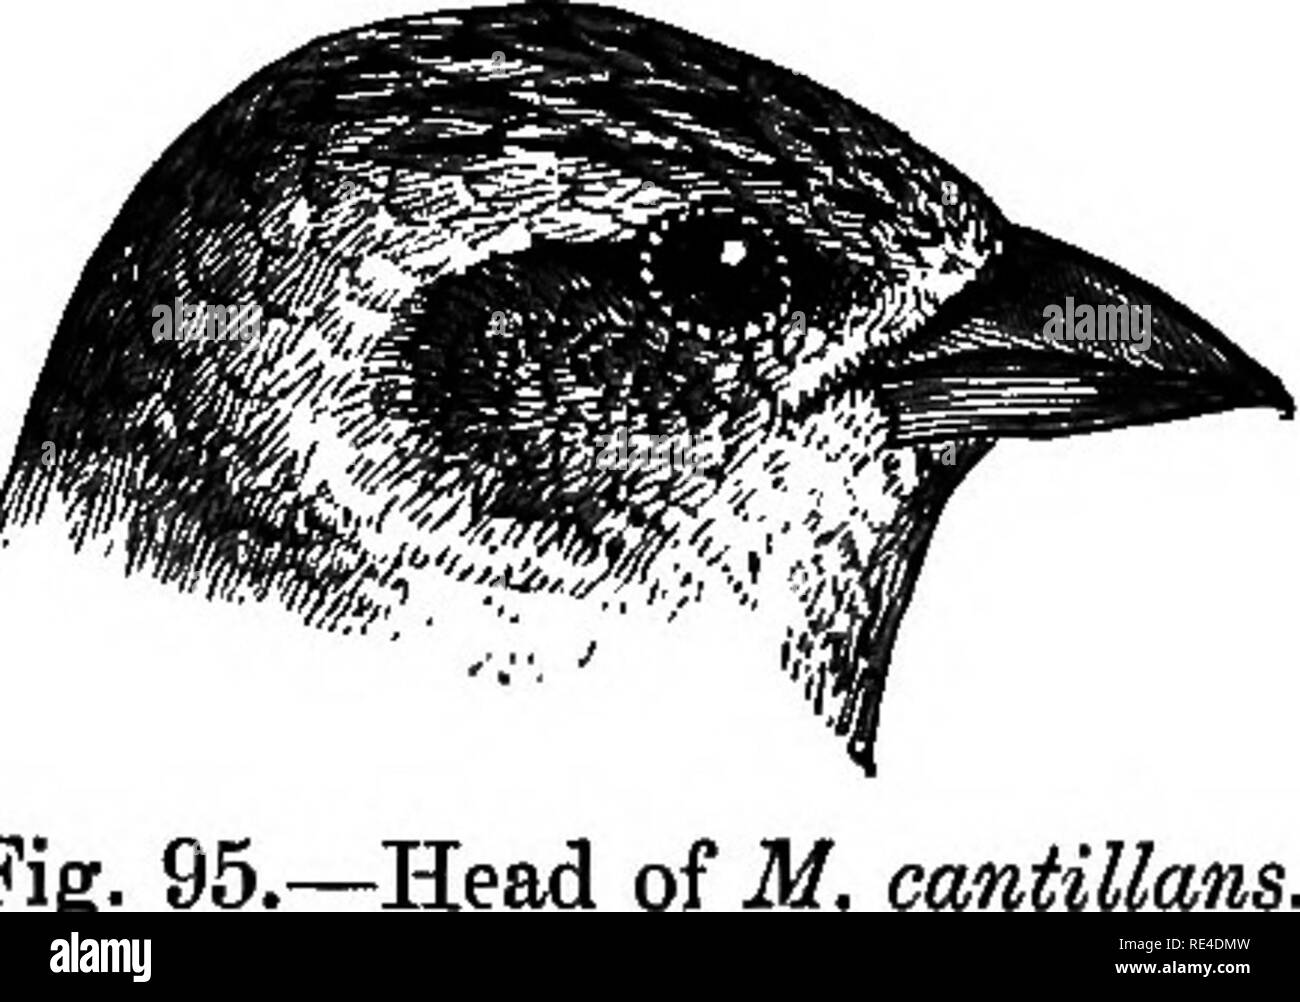 . Birds. Birds. MIBAFBA. 333 869. Mirafra cantillans. The Singing Bush-Larlc. Mirafra cantillans, Jerd-, Blyth, J. A. 8. B. xiii, p. 960 (1844); id. Cat. p. 134 ; Horsf. (Â§â M. Cat. ii, p. 476; Jerd. B. I. ii, p. 420; Hume, N. ^ E. p. 476 ; id. Cat. no. 757; Barnes, Birds Bom. p. 275 ; Sharpe, Cat. B. M. xiii, p. 605; Oatea in Hume's N. Sf E. 2nd ed. ii, p. 227. Aghun, Aghin, Hind.; Burutta pitta, Aghin pitta, Tel. Coloration. After the autumn moult the whole upper plumage is dark brown, each feather with rufous lateral margins and a whitish terminal band; wing-coverts and tertiaries brown ma Stock Photo